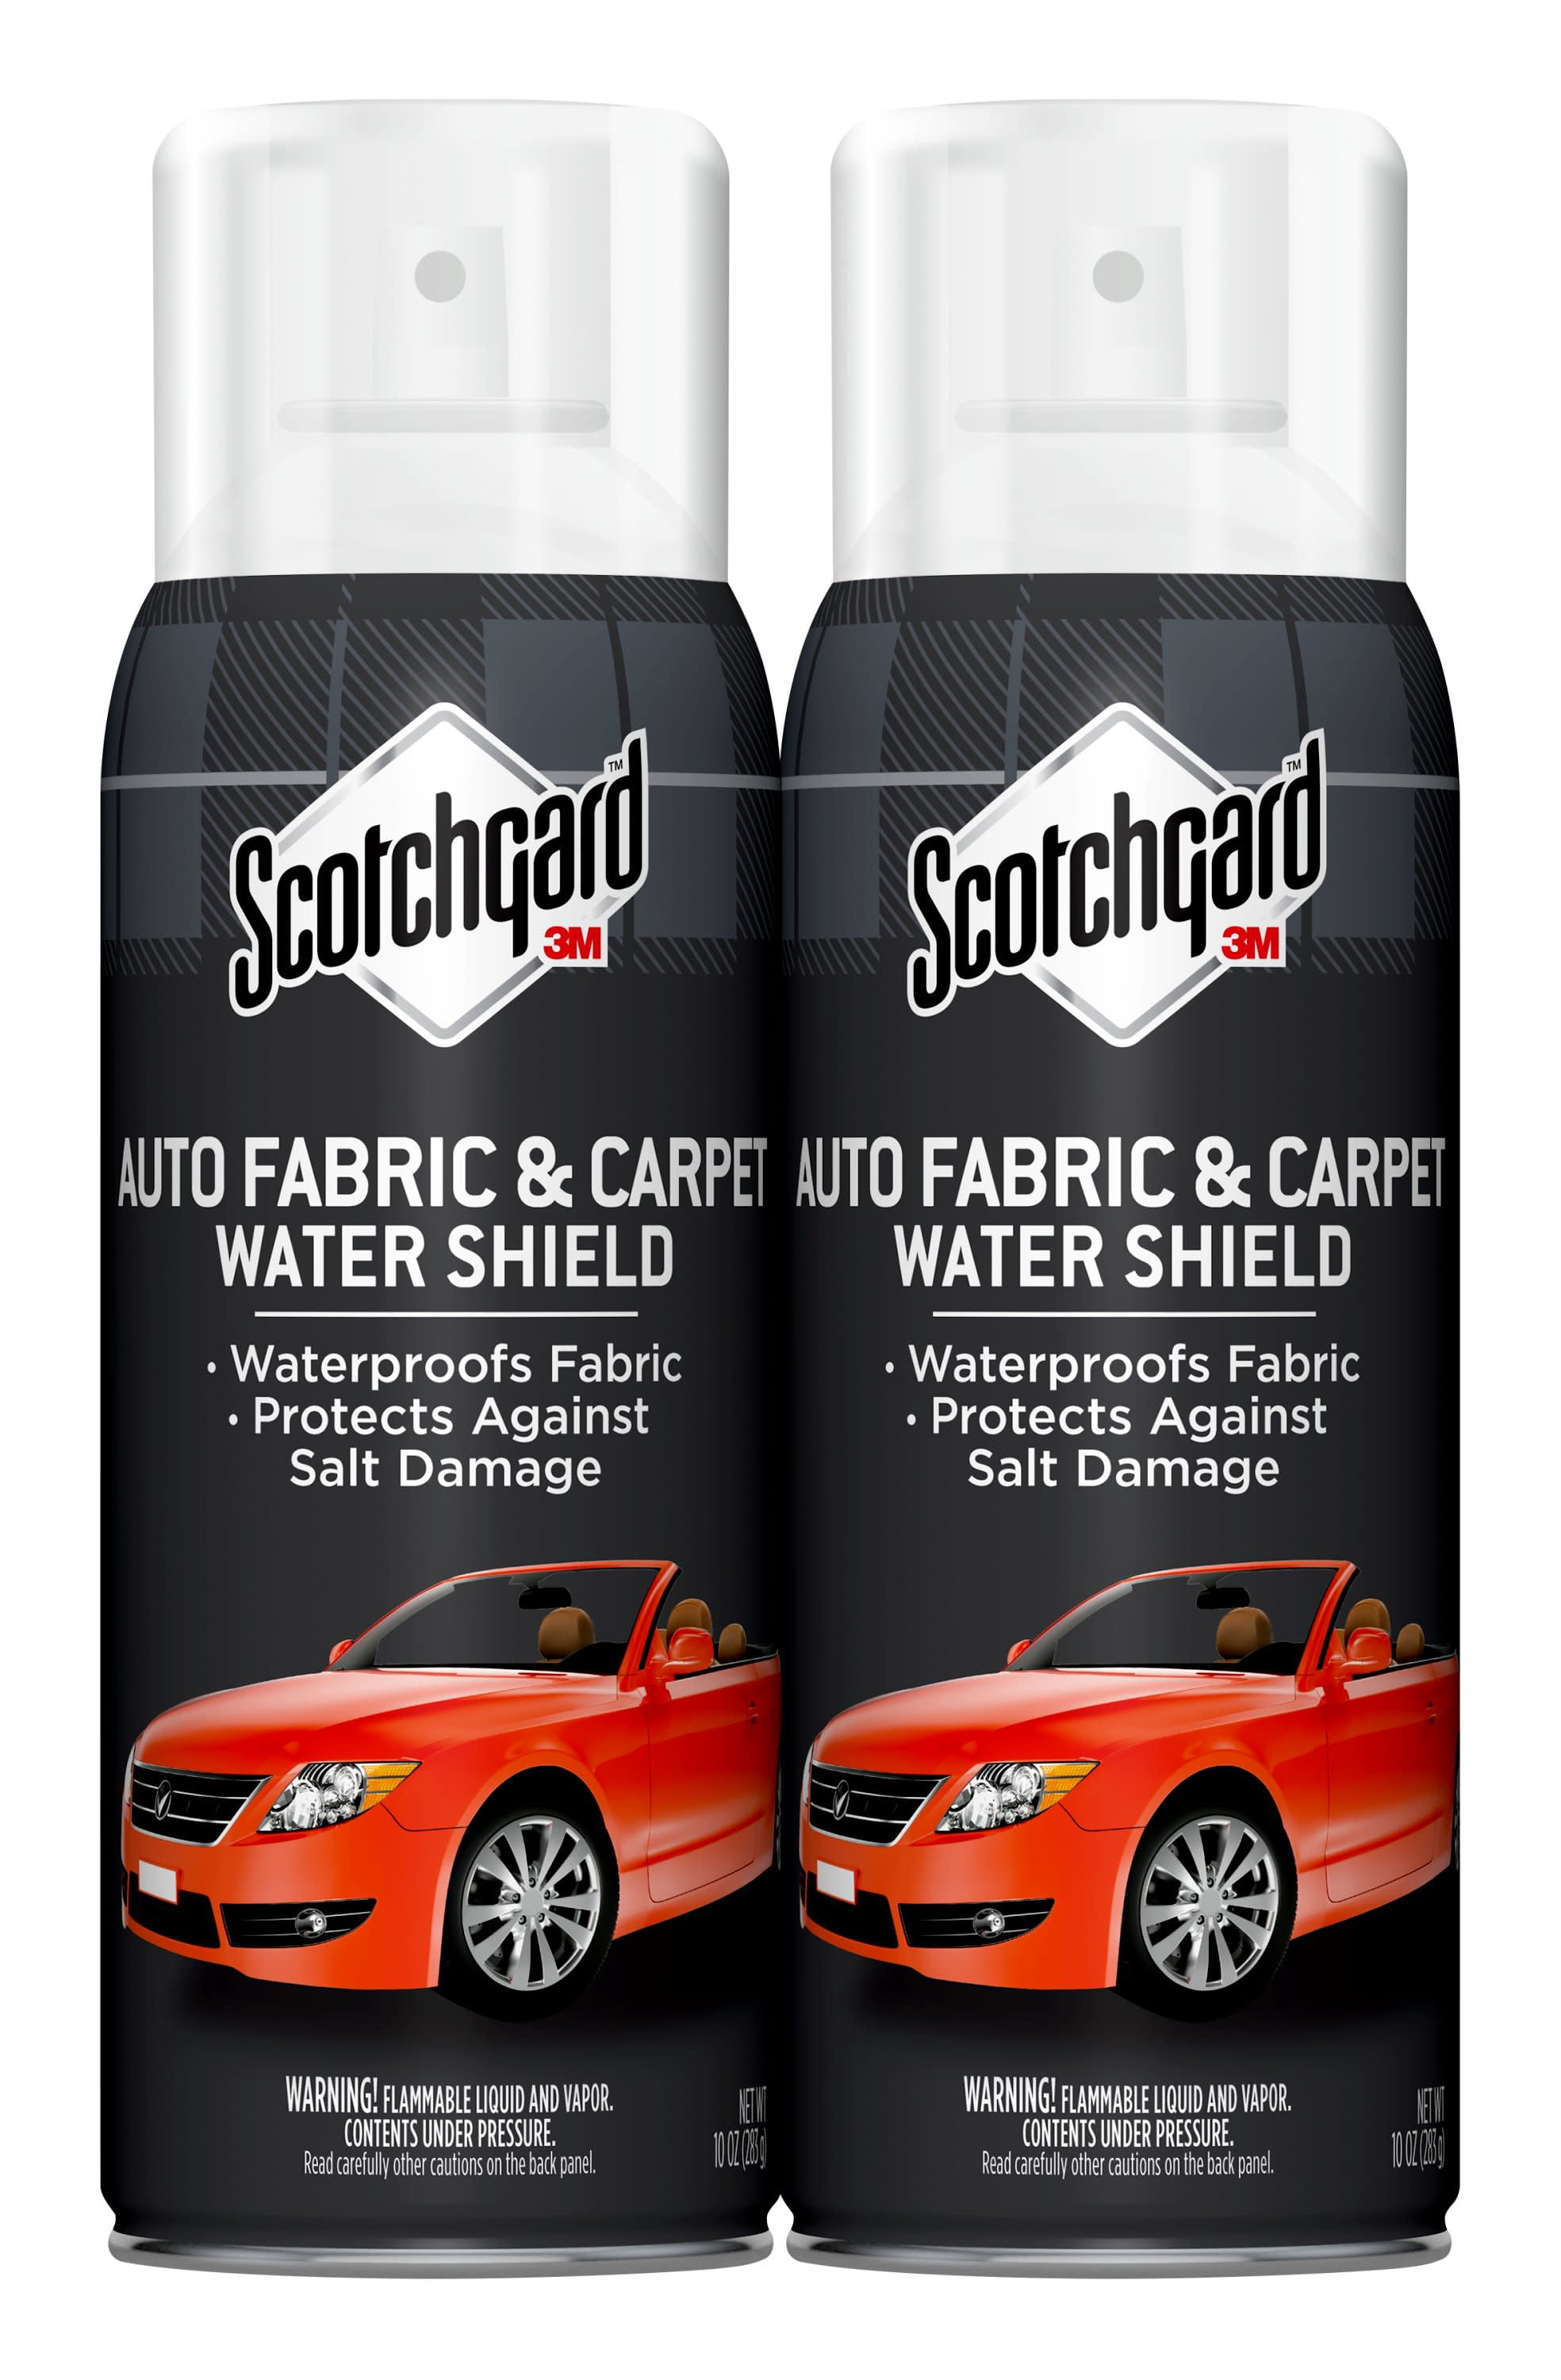 Furniture Clinic Carpet & Upholstery Protector Spray - Repels Oil and  Water-Based Stains - Fabric Protector Spray for Upholstery, Carpets, Sofas,  Car Seats, Shoes - 500ml - Buy Online - 116259110